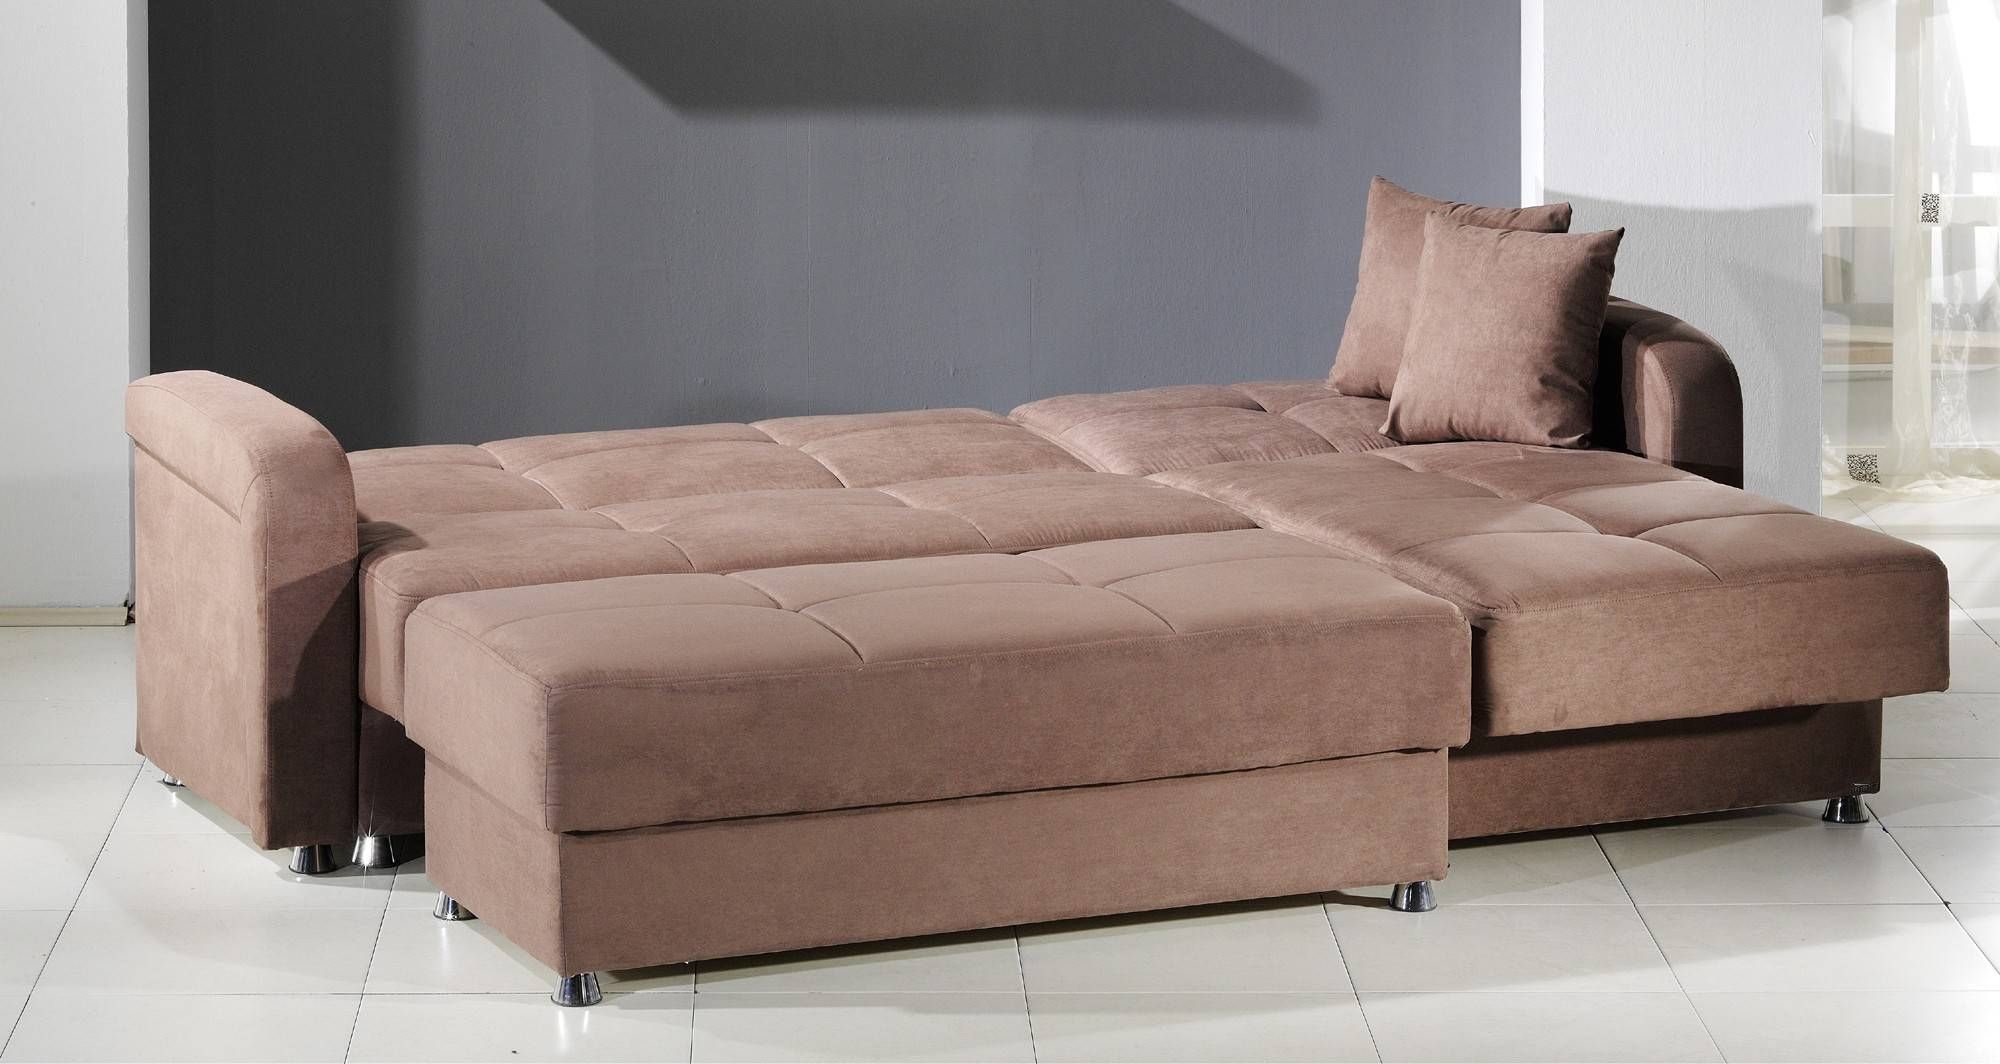 Wonderful Sleeper Sectional Sofa With Chaise Latest Cheap Regarding Sleeper Sectional Sofas (Photo 16 of 30)